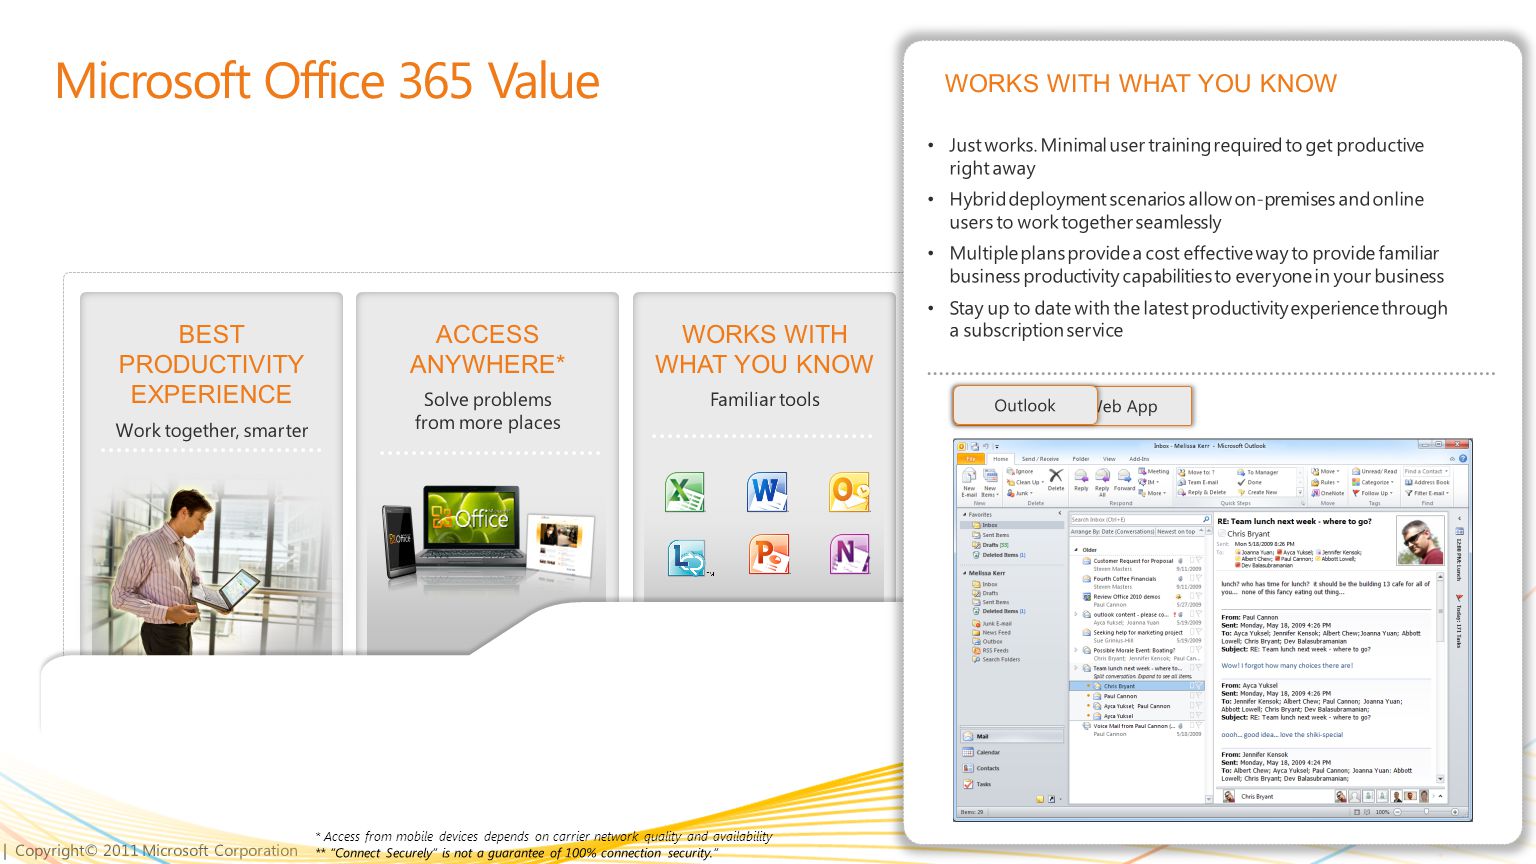 | Copyright© 2011 Microsoft Corporation BEST PRODUCTIVITY EXPERIENCE Work together, smarter Microsoft Office 365 Value ACCESS ANYWHERE* Solve problems from more places WORKS WITH WHAT YOU KNOW Familiar tools ROBUST SECURITY AND RELIABILITY 99.9% uptime.